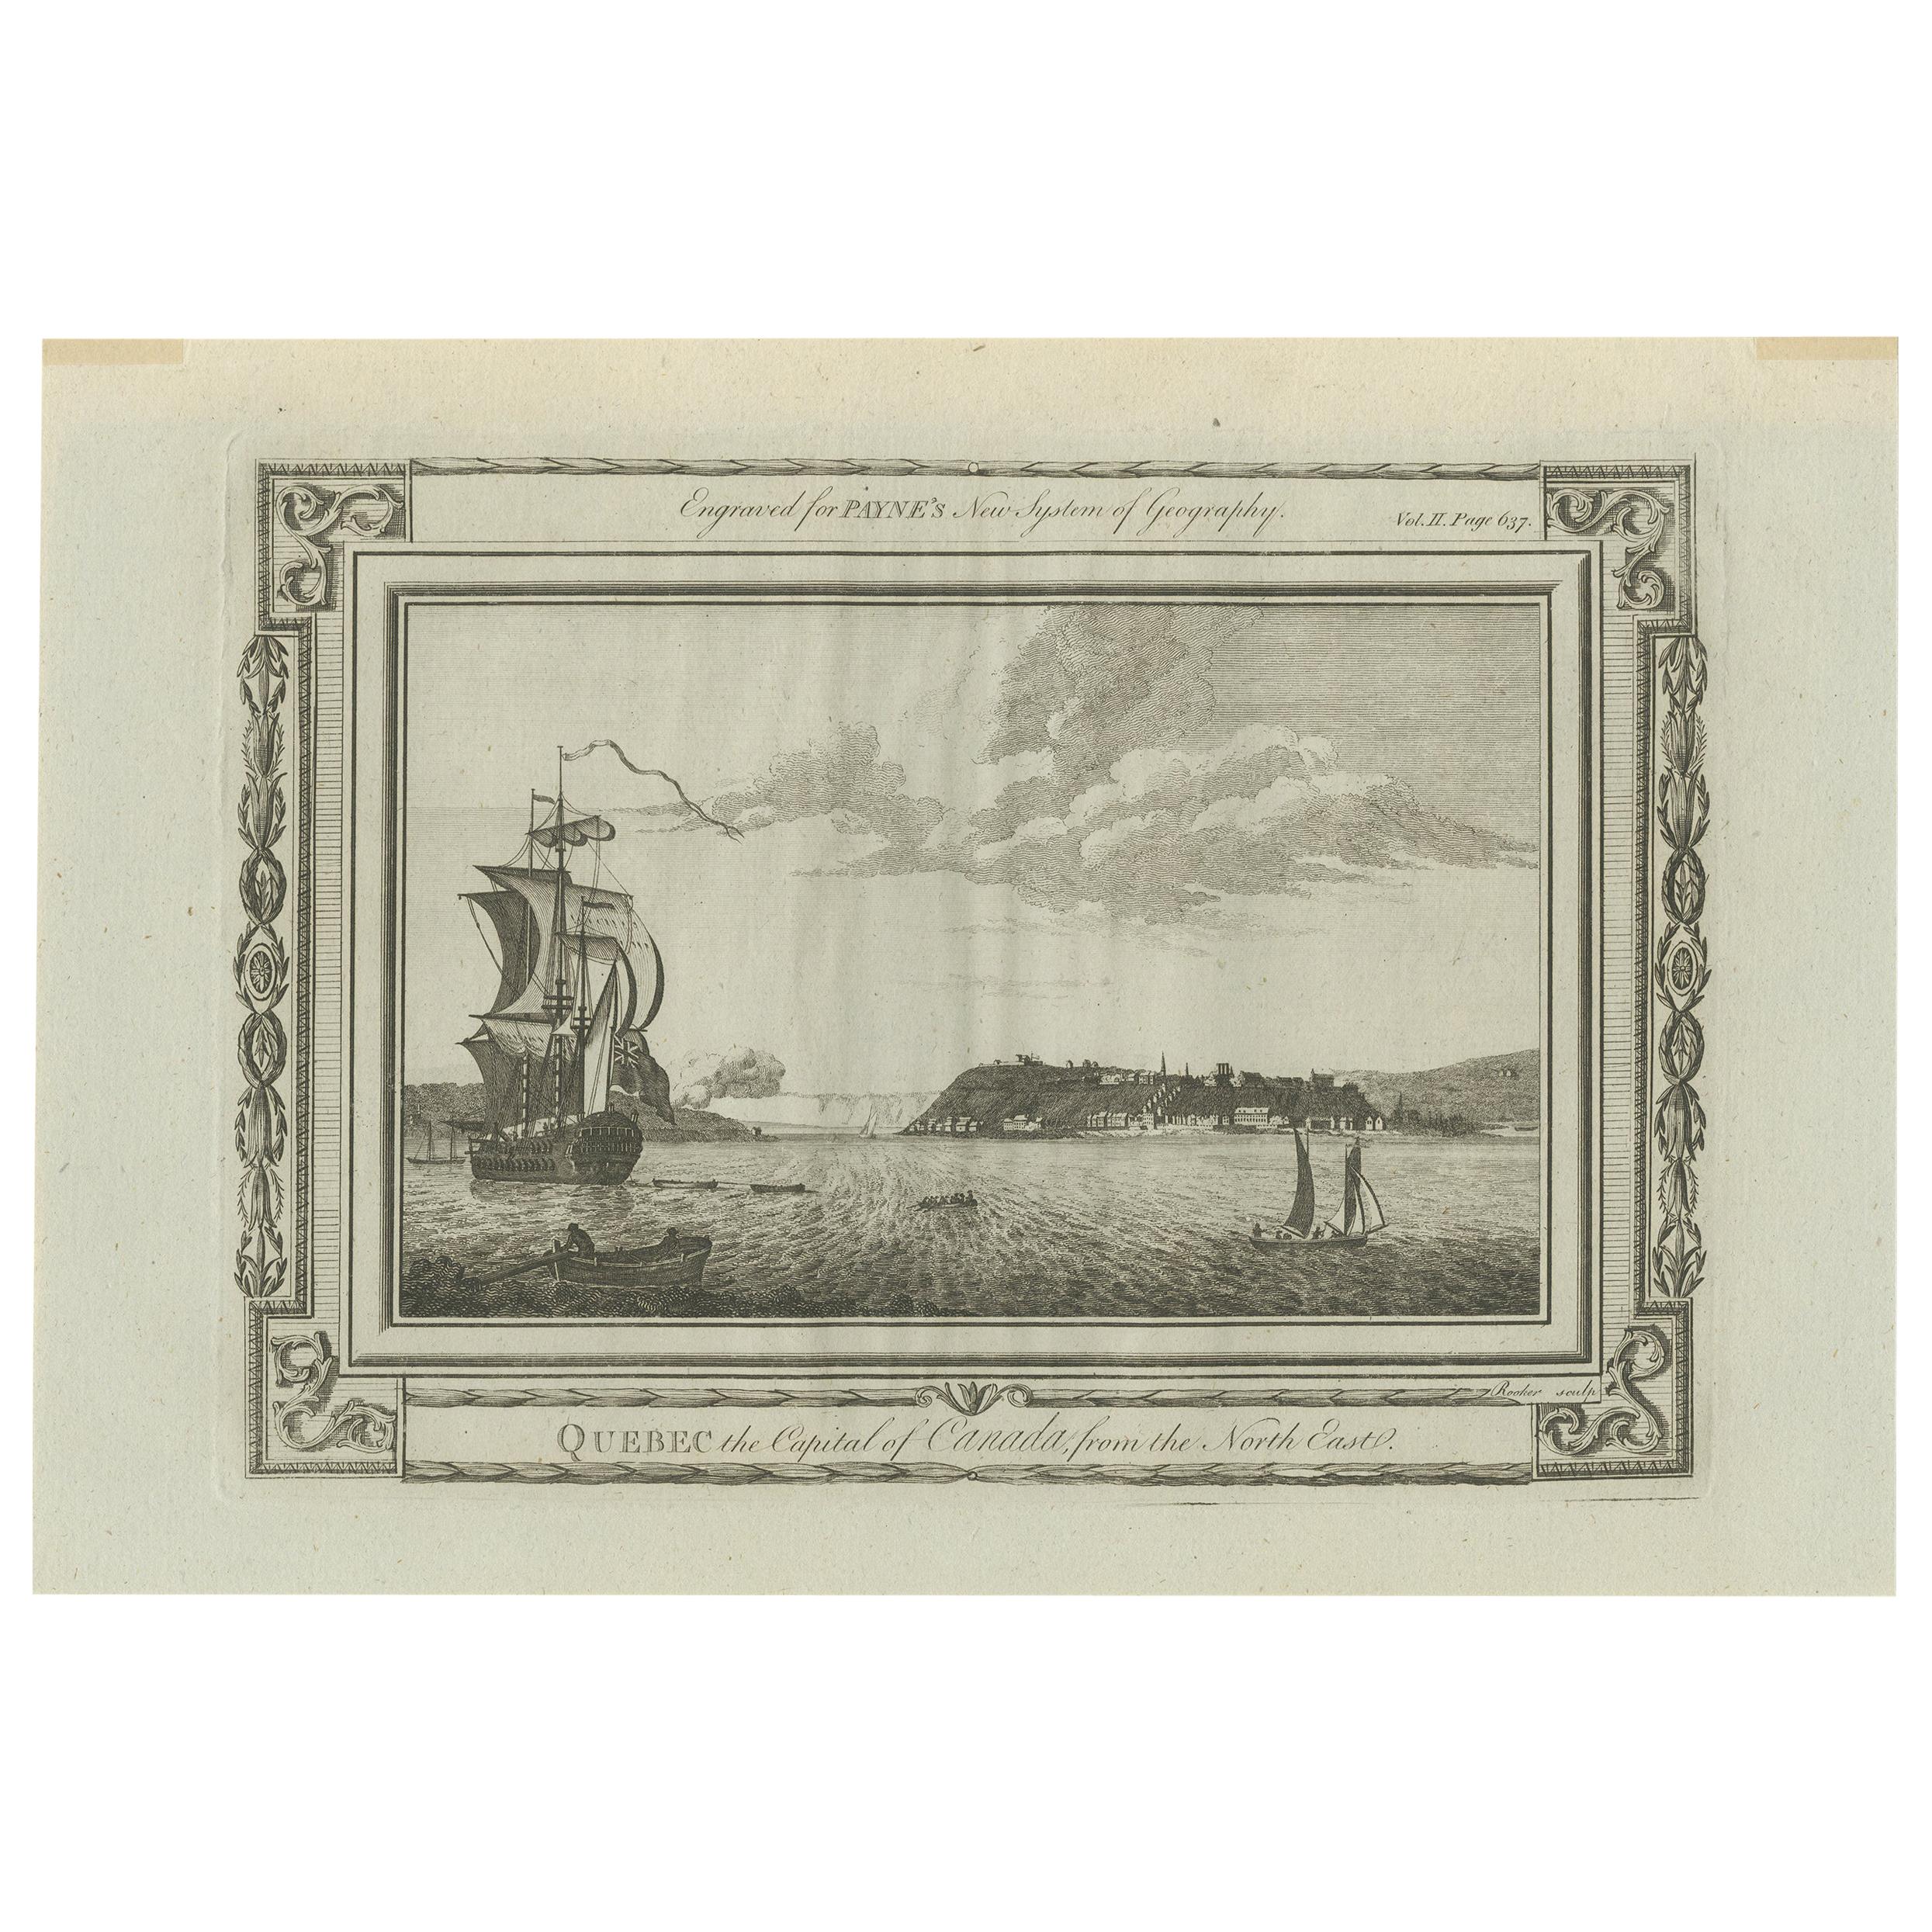 Antique View of Quebec, the Capital of Canada seen from the North East,  c.1780